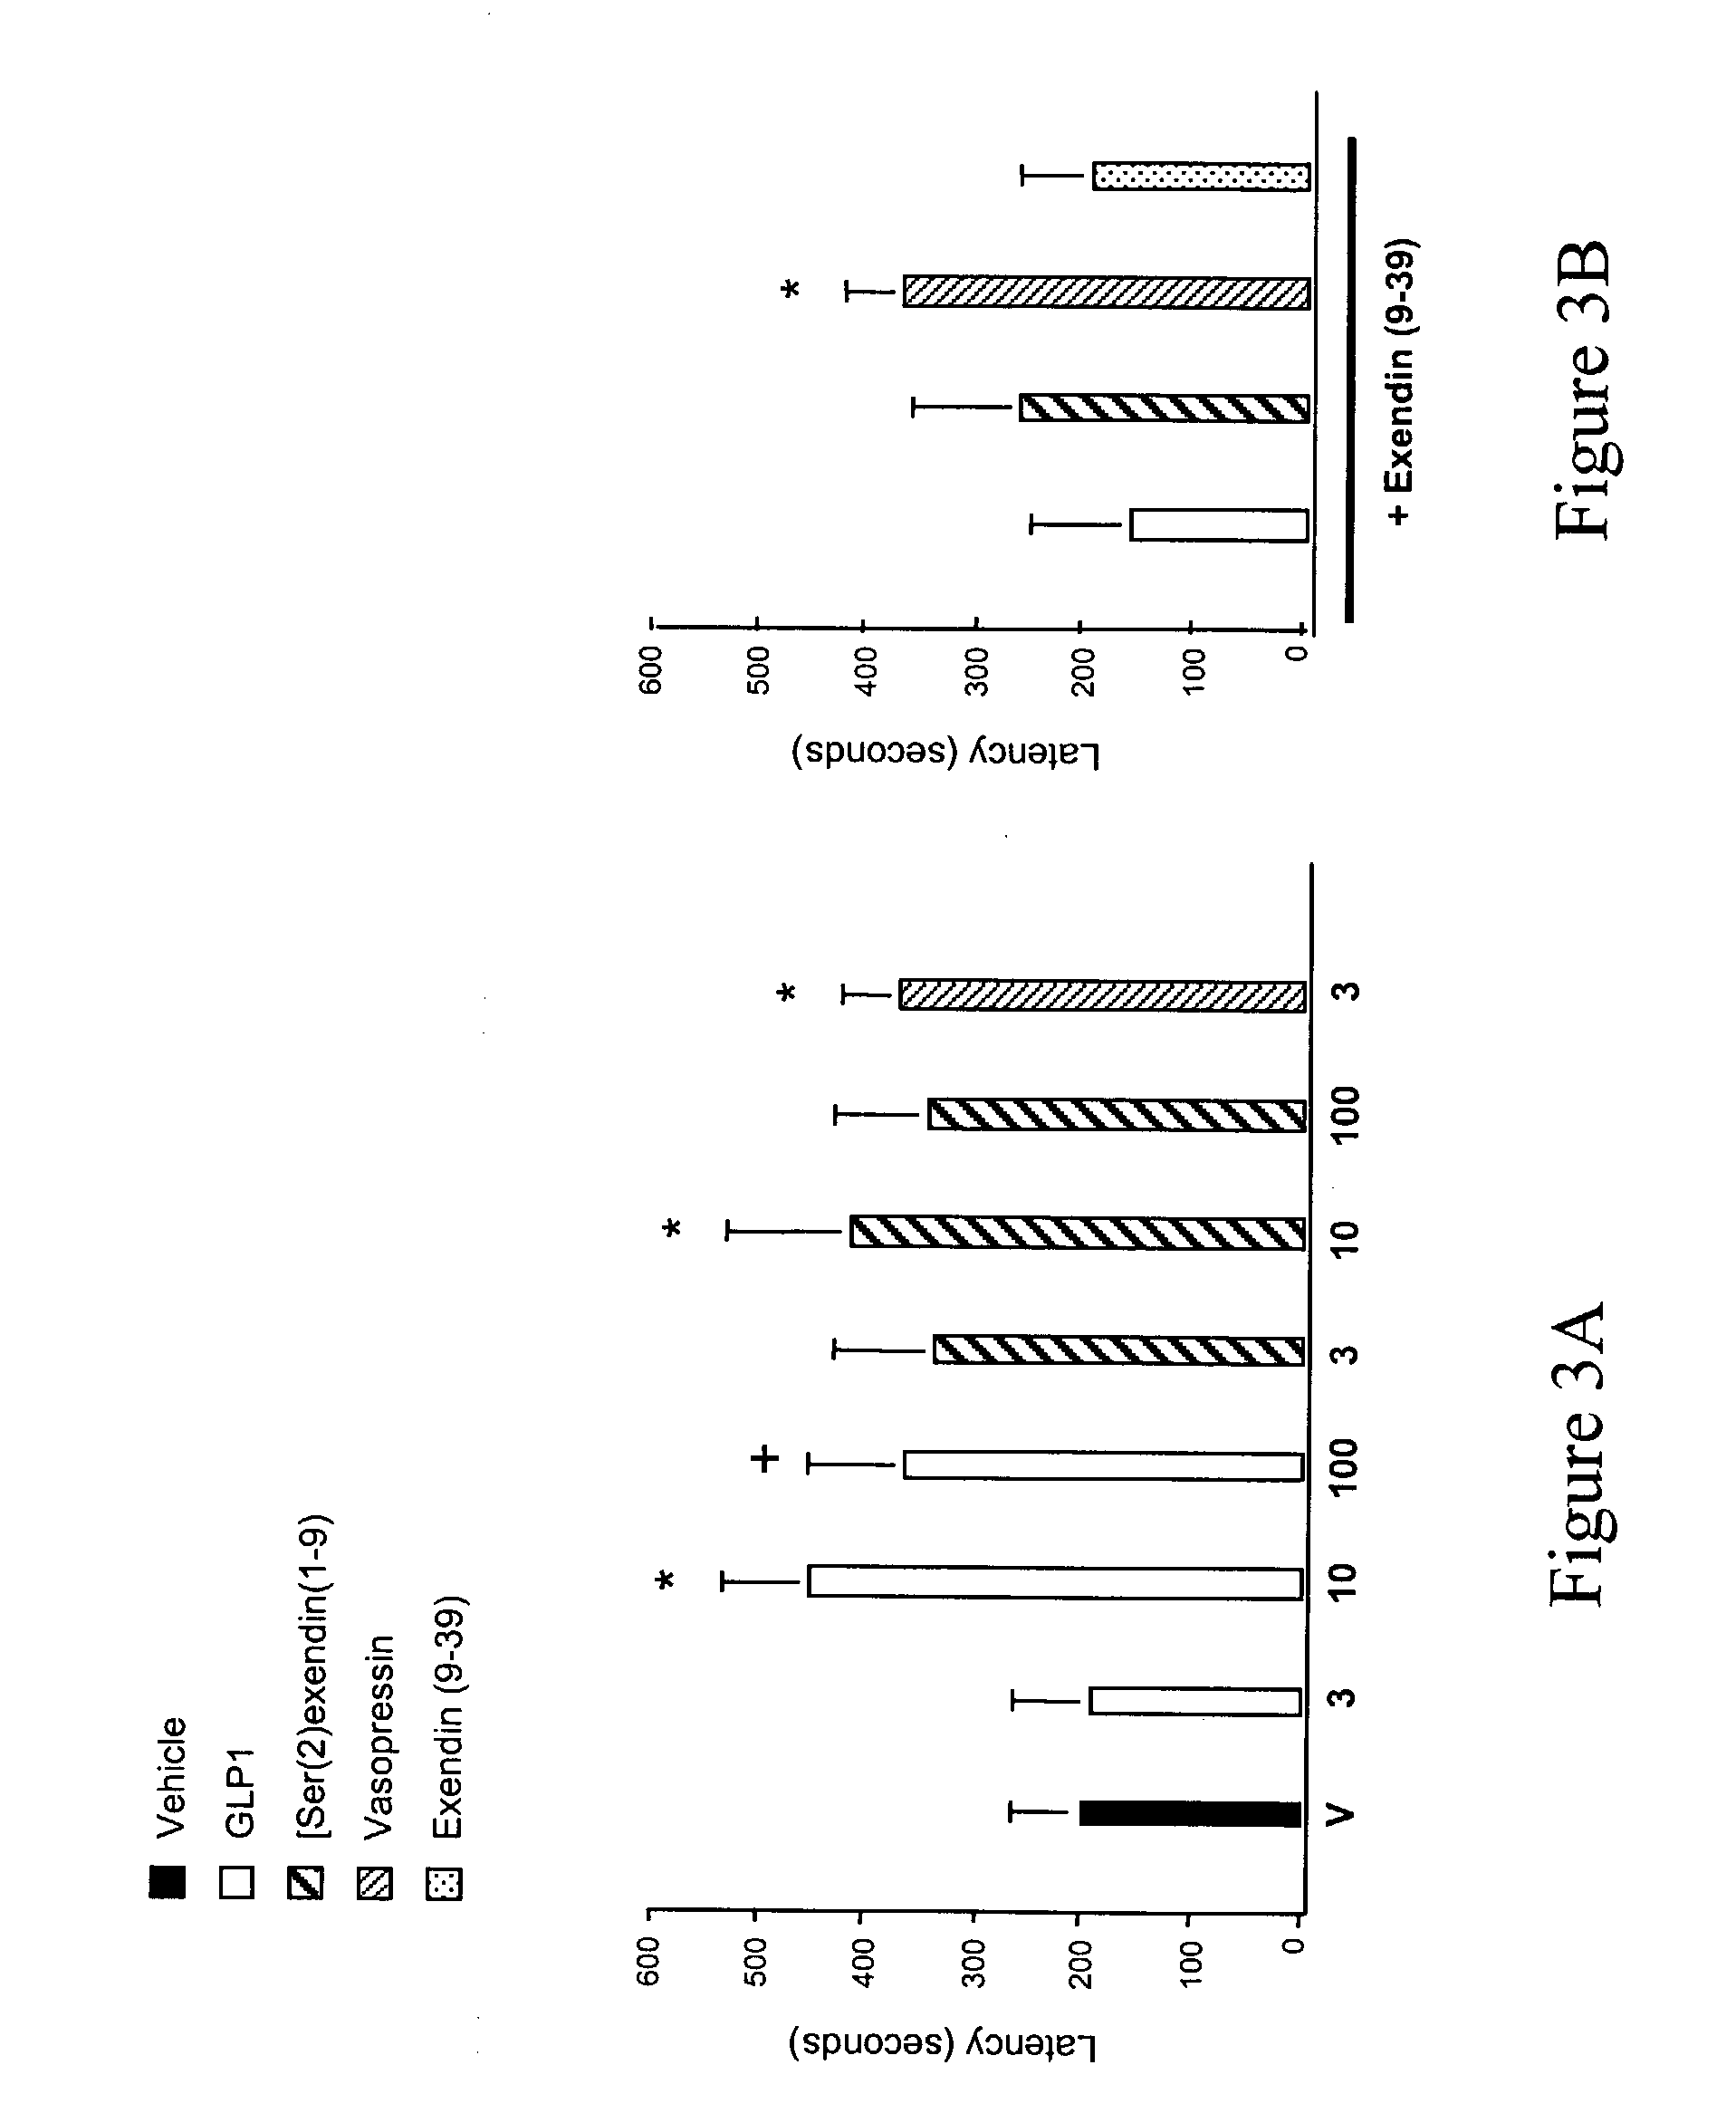 Peptide compositions with effects on blood glucose